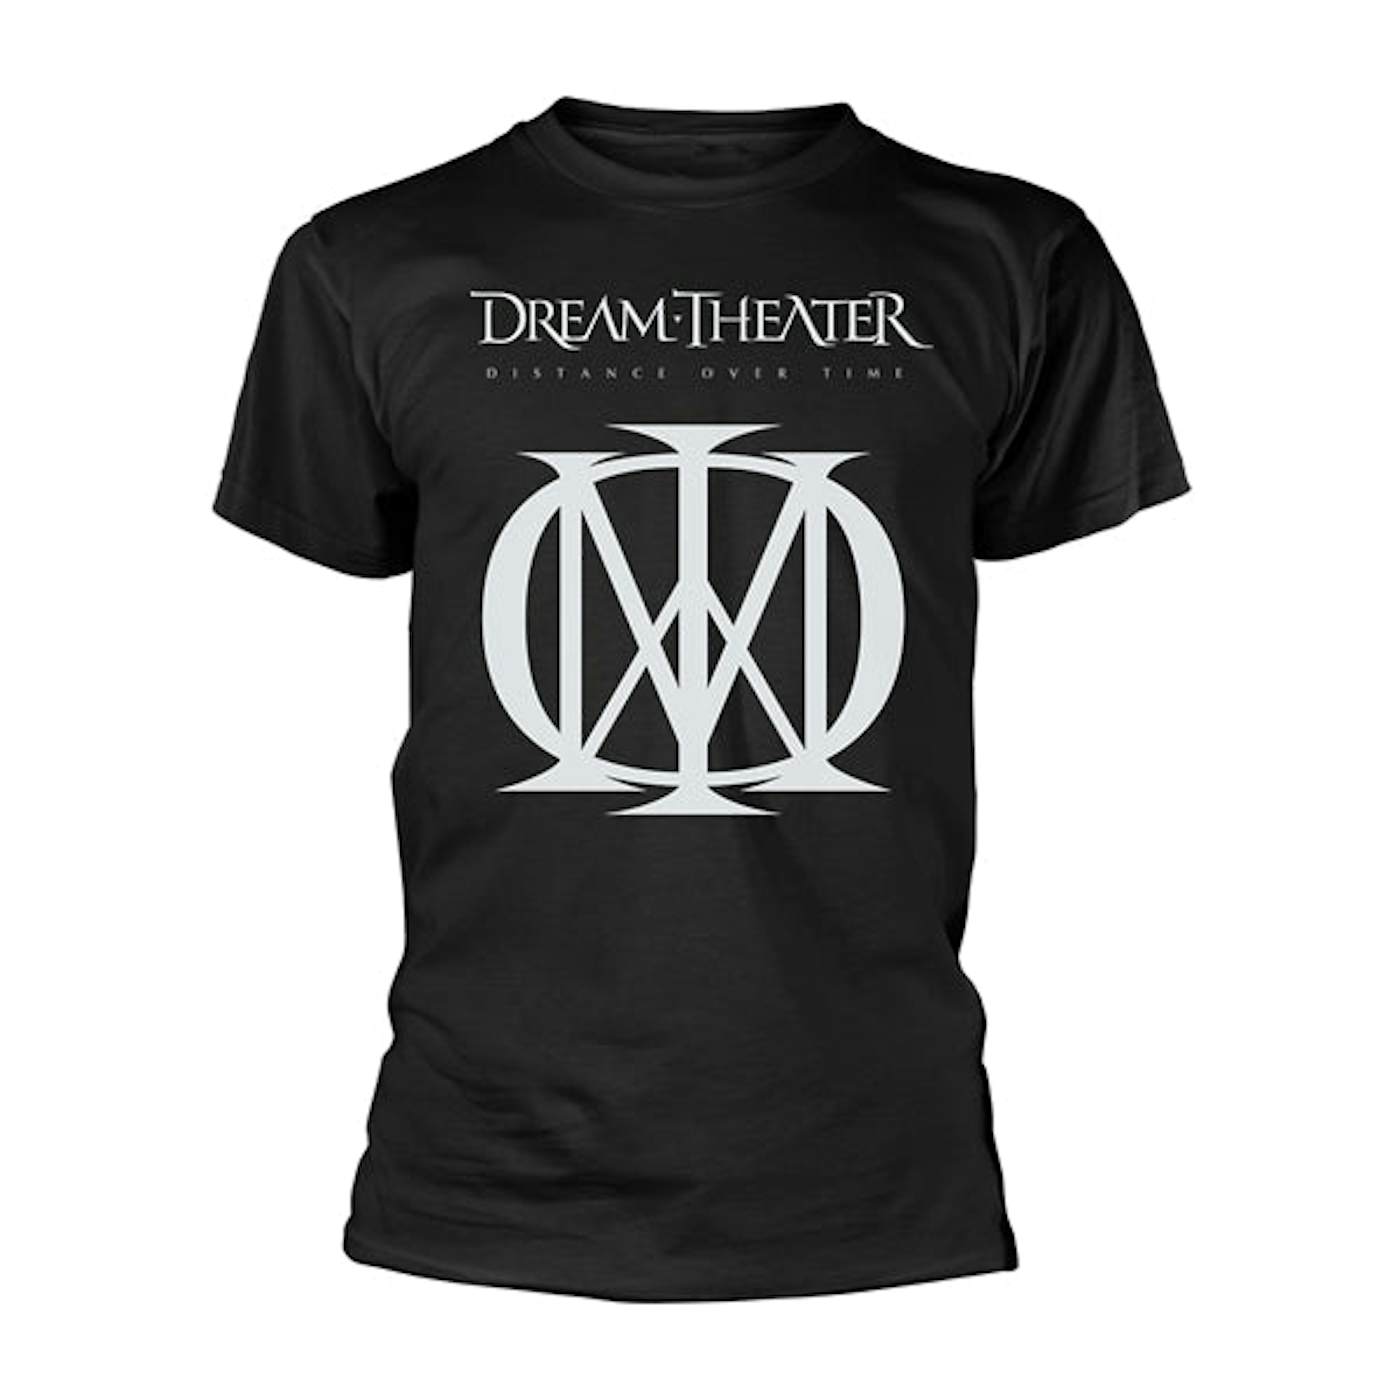 Dream Theater T-Shirt - Distance Over Time (Logo)